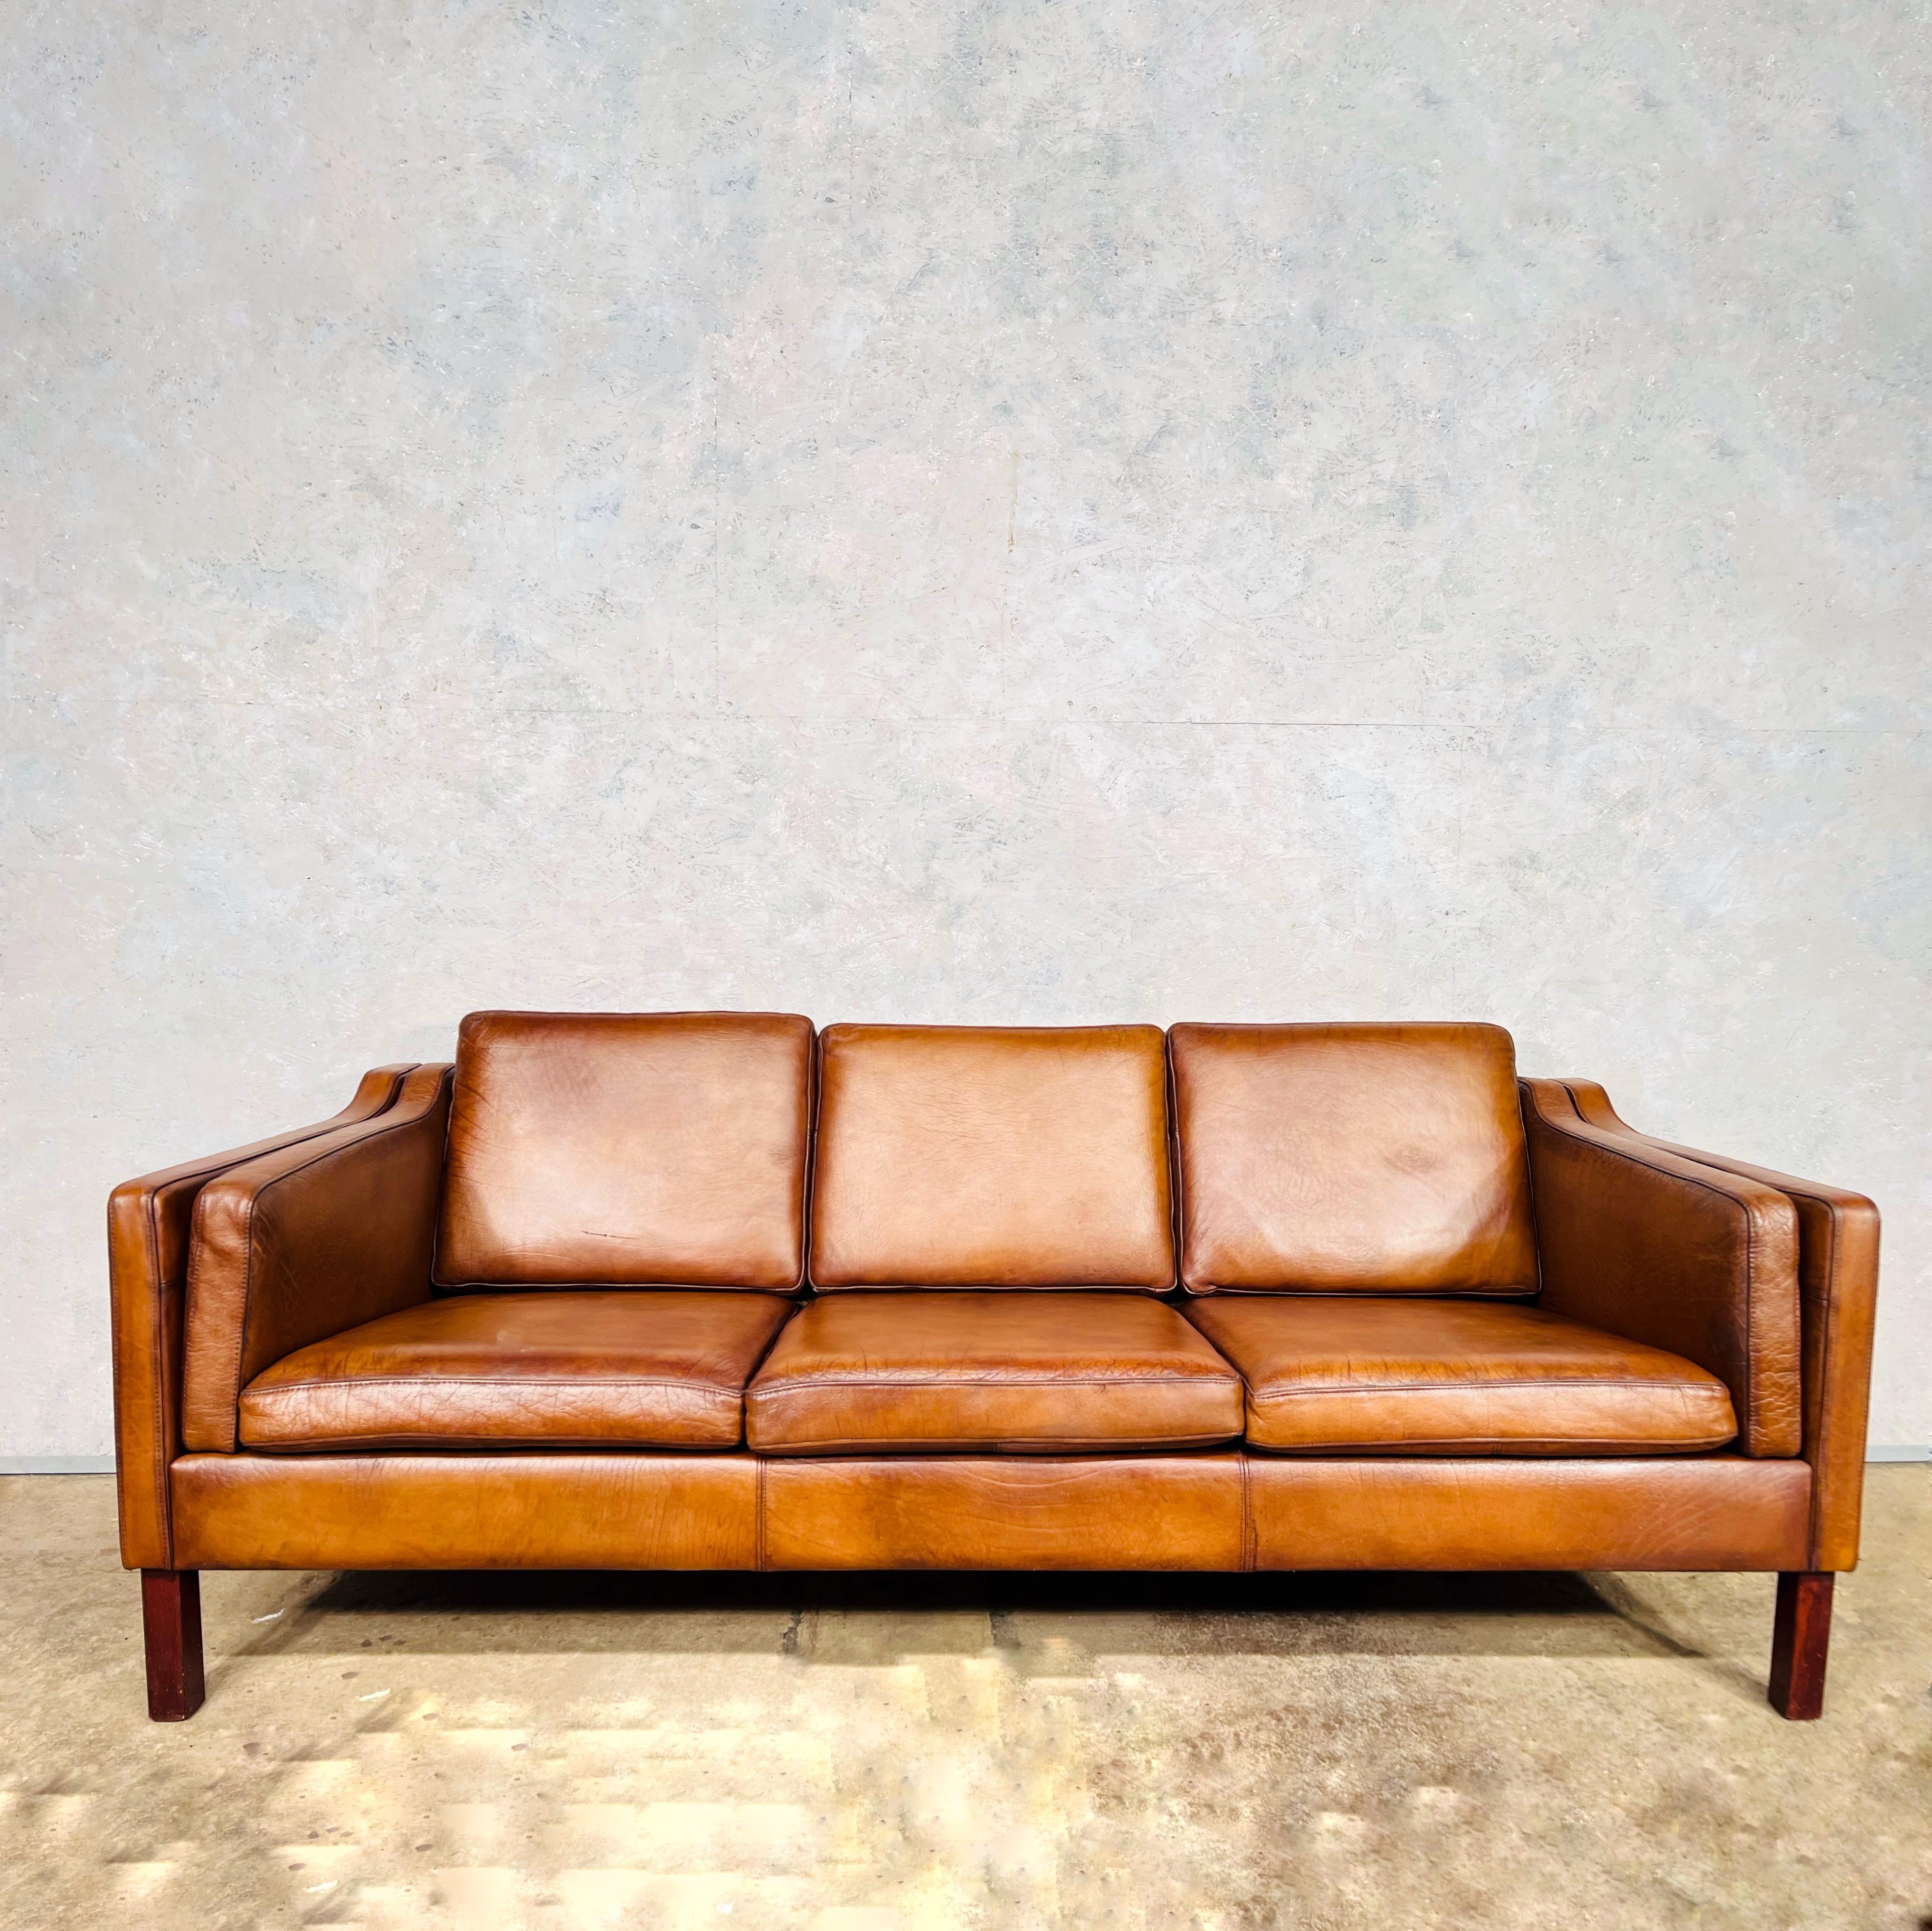 Vintage 1970s Danish vemb mobelfabrik 3 seater tan leather sofa.
Beautiful hand dyed leather and a beautiful tan colour with a great patina and finish.

In great condition.

Viewings welcome at our showroom in Lewes, East Sussex.


